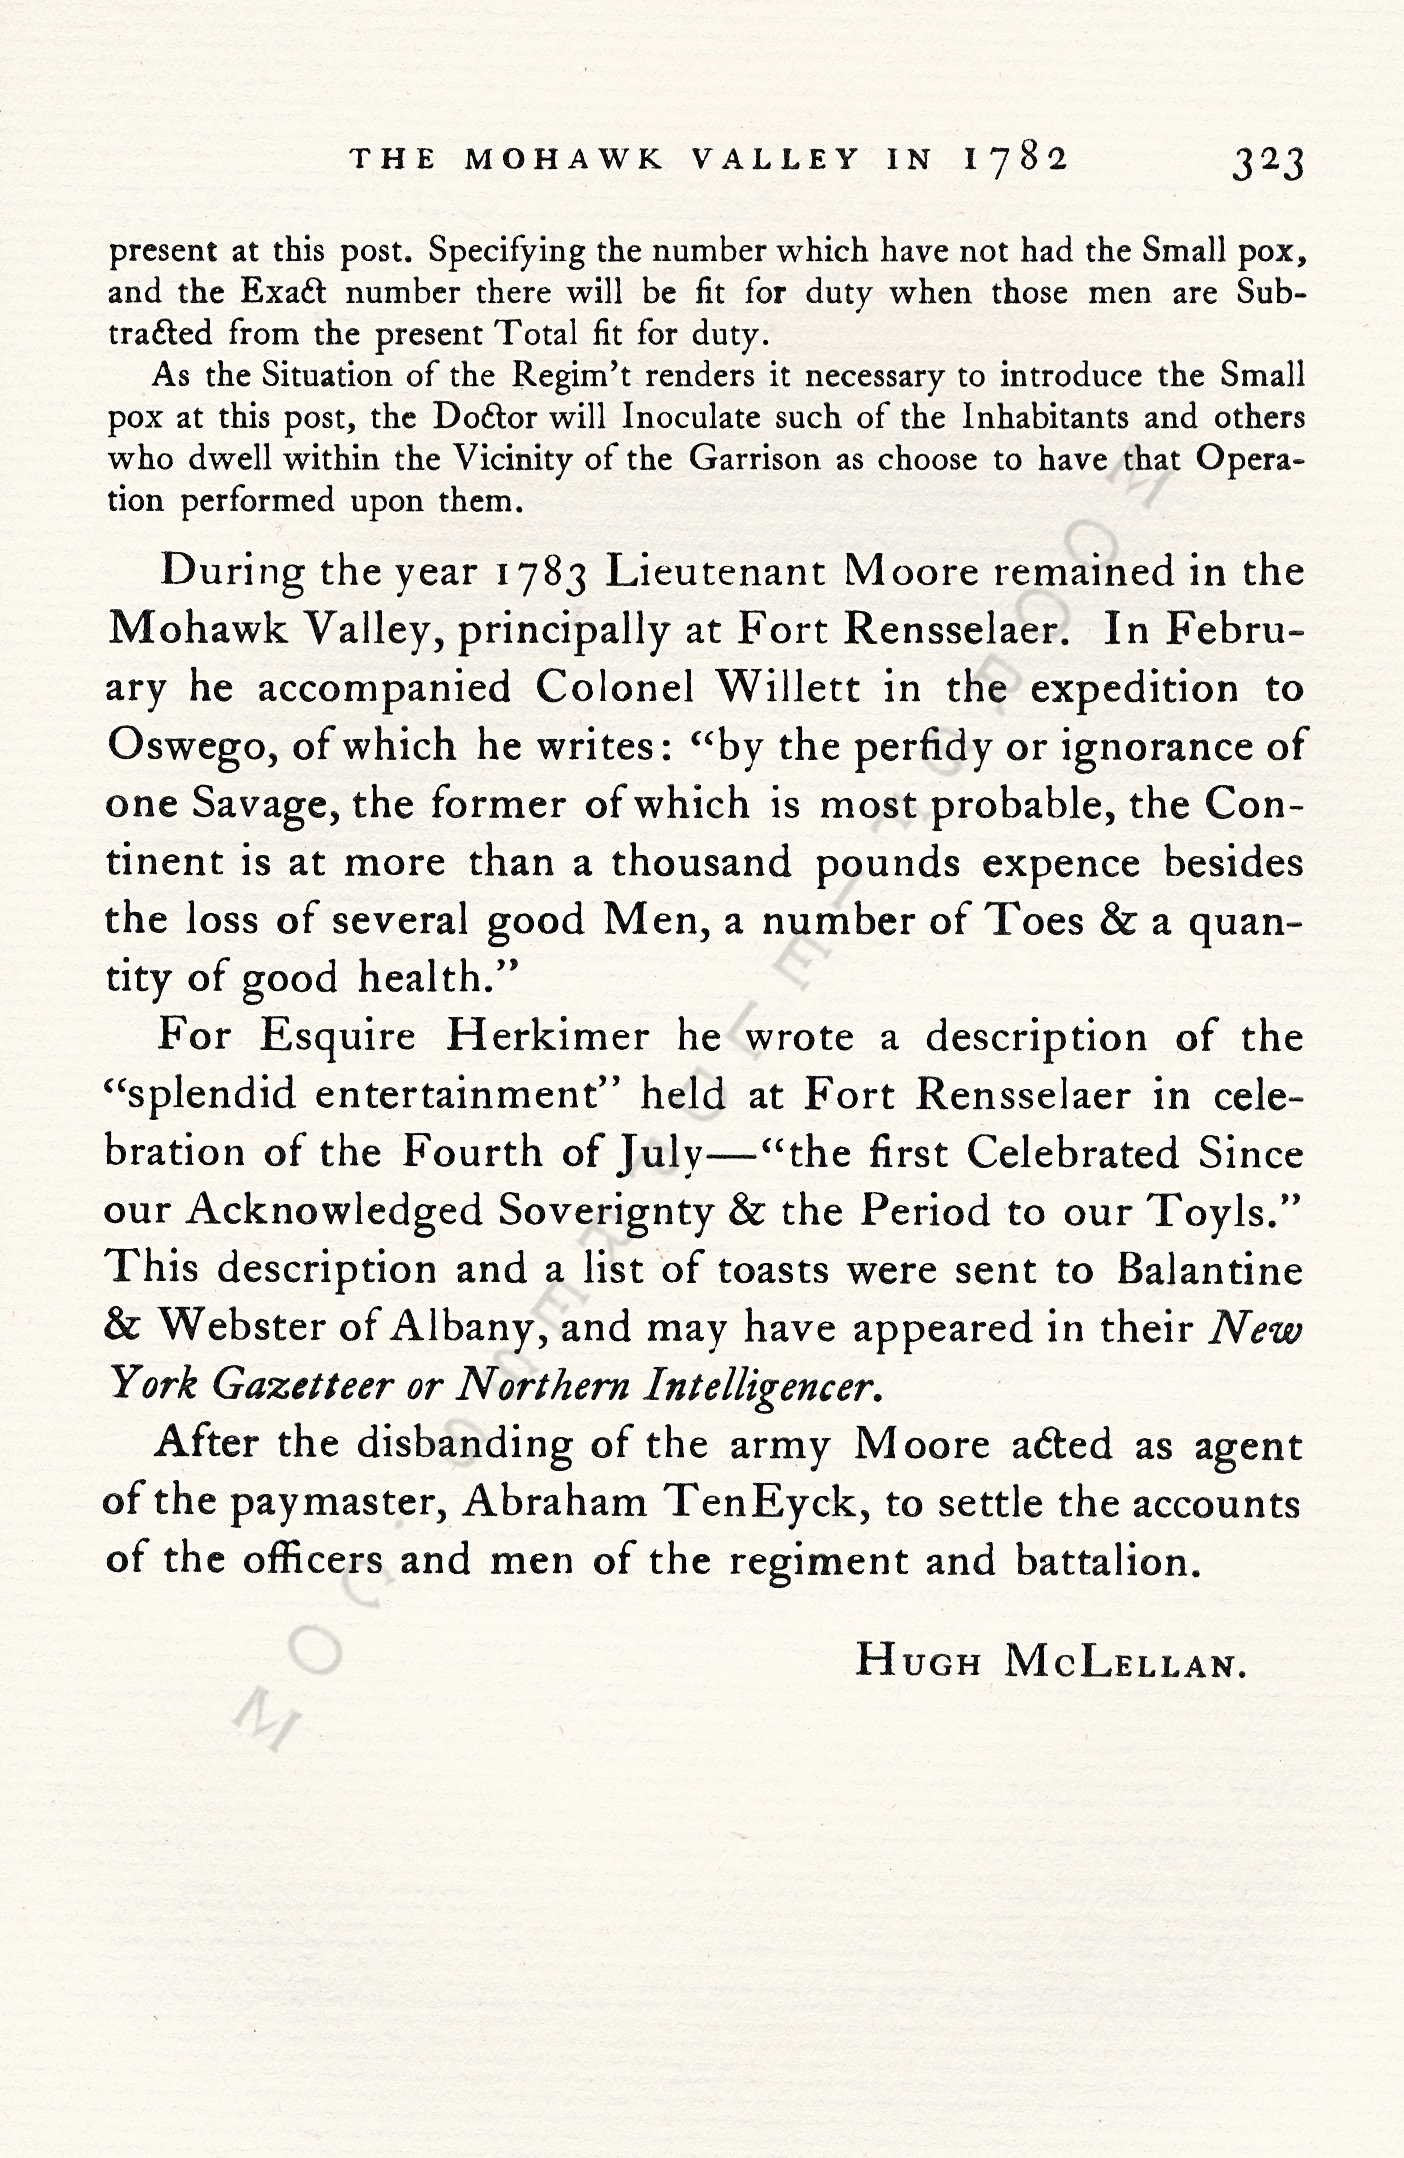 Pliny
                      Moore Papers-In the Mohawk Valley in 1782: Col.
                      Marinus Willett’s Regiment of Levies